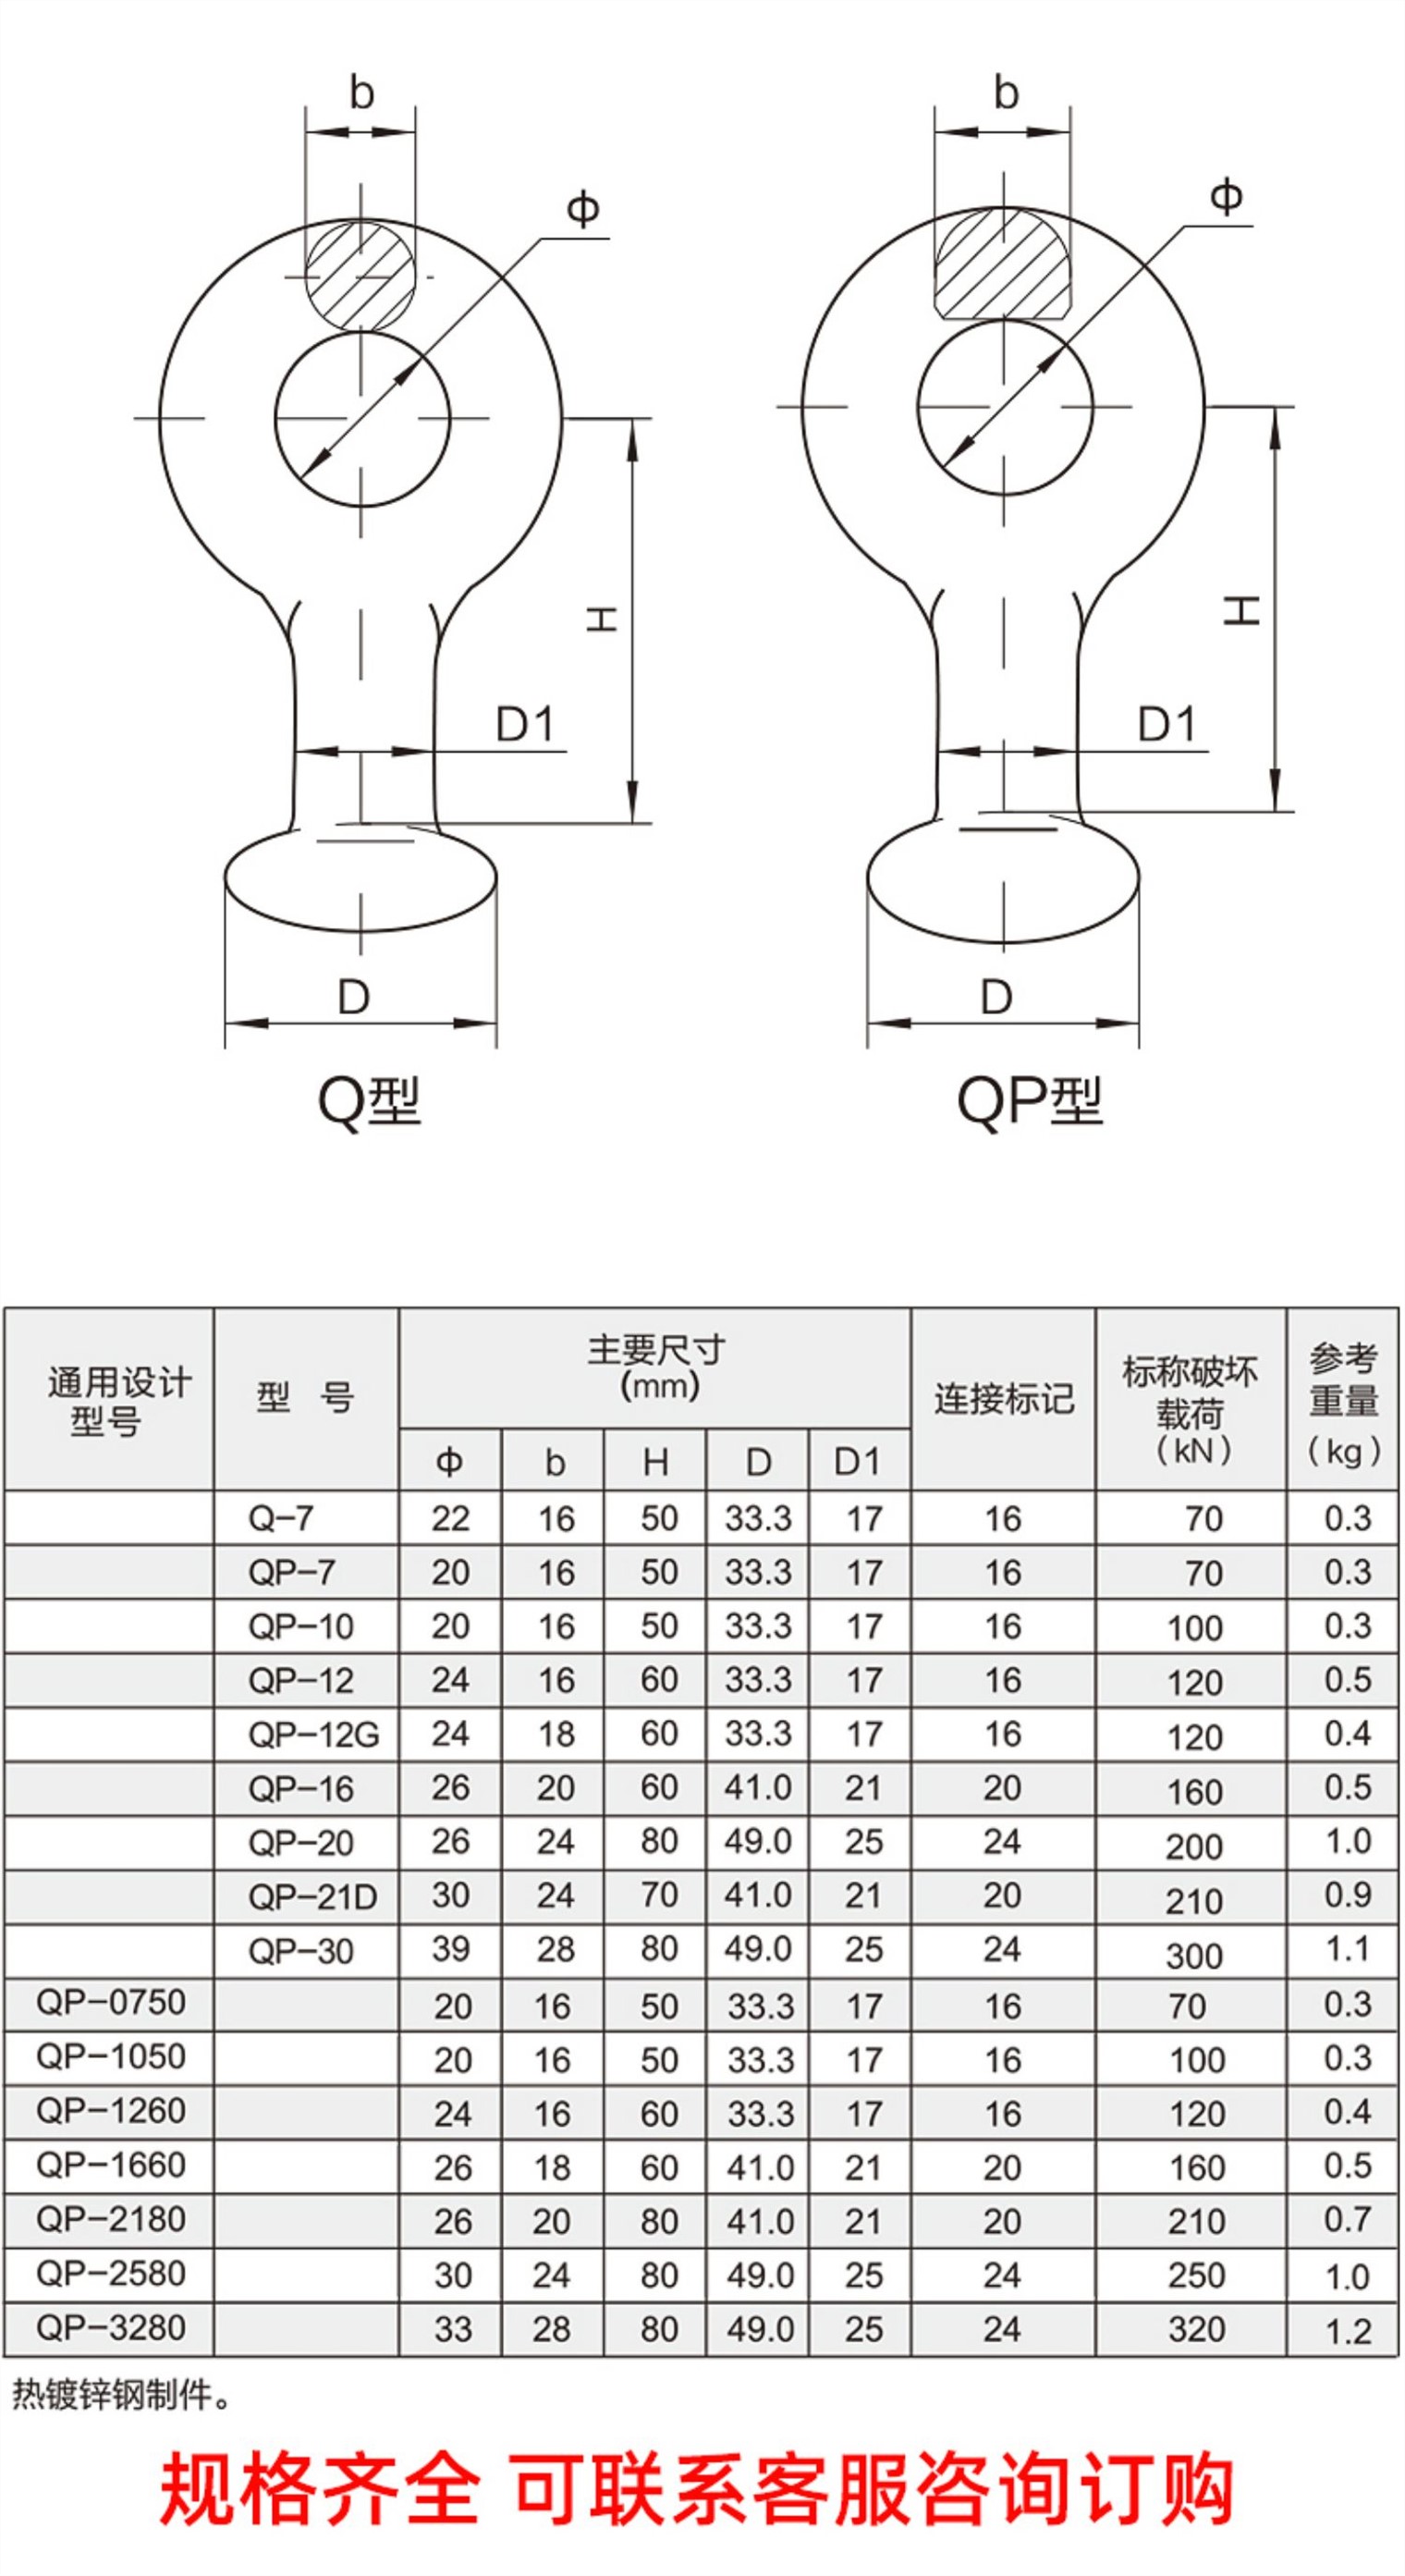 Hengrui Electric Power National Standard QP Type QH-7-10 Ball Head Hanging Ring Galvanized Twisted Wire QP-3280-7 Connection Hardware